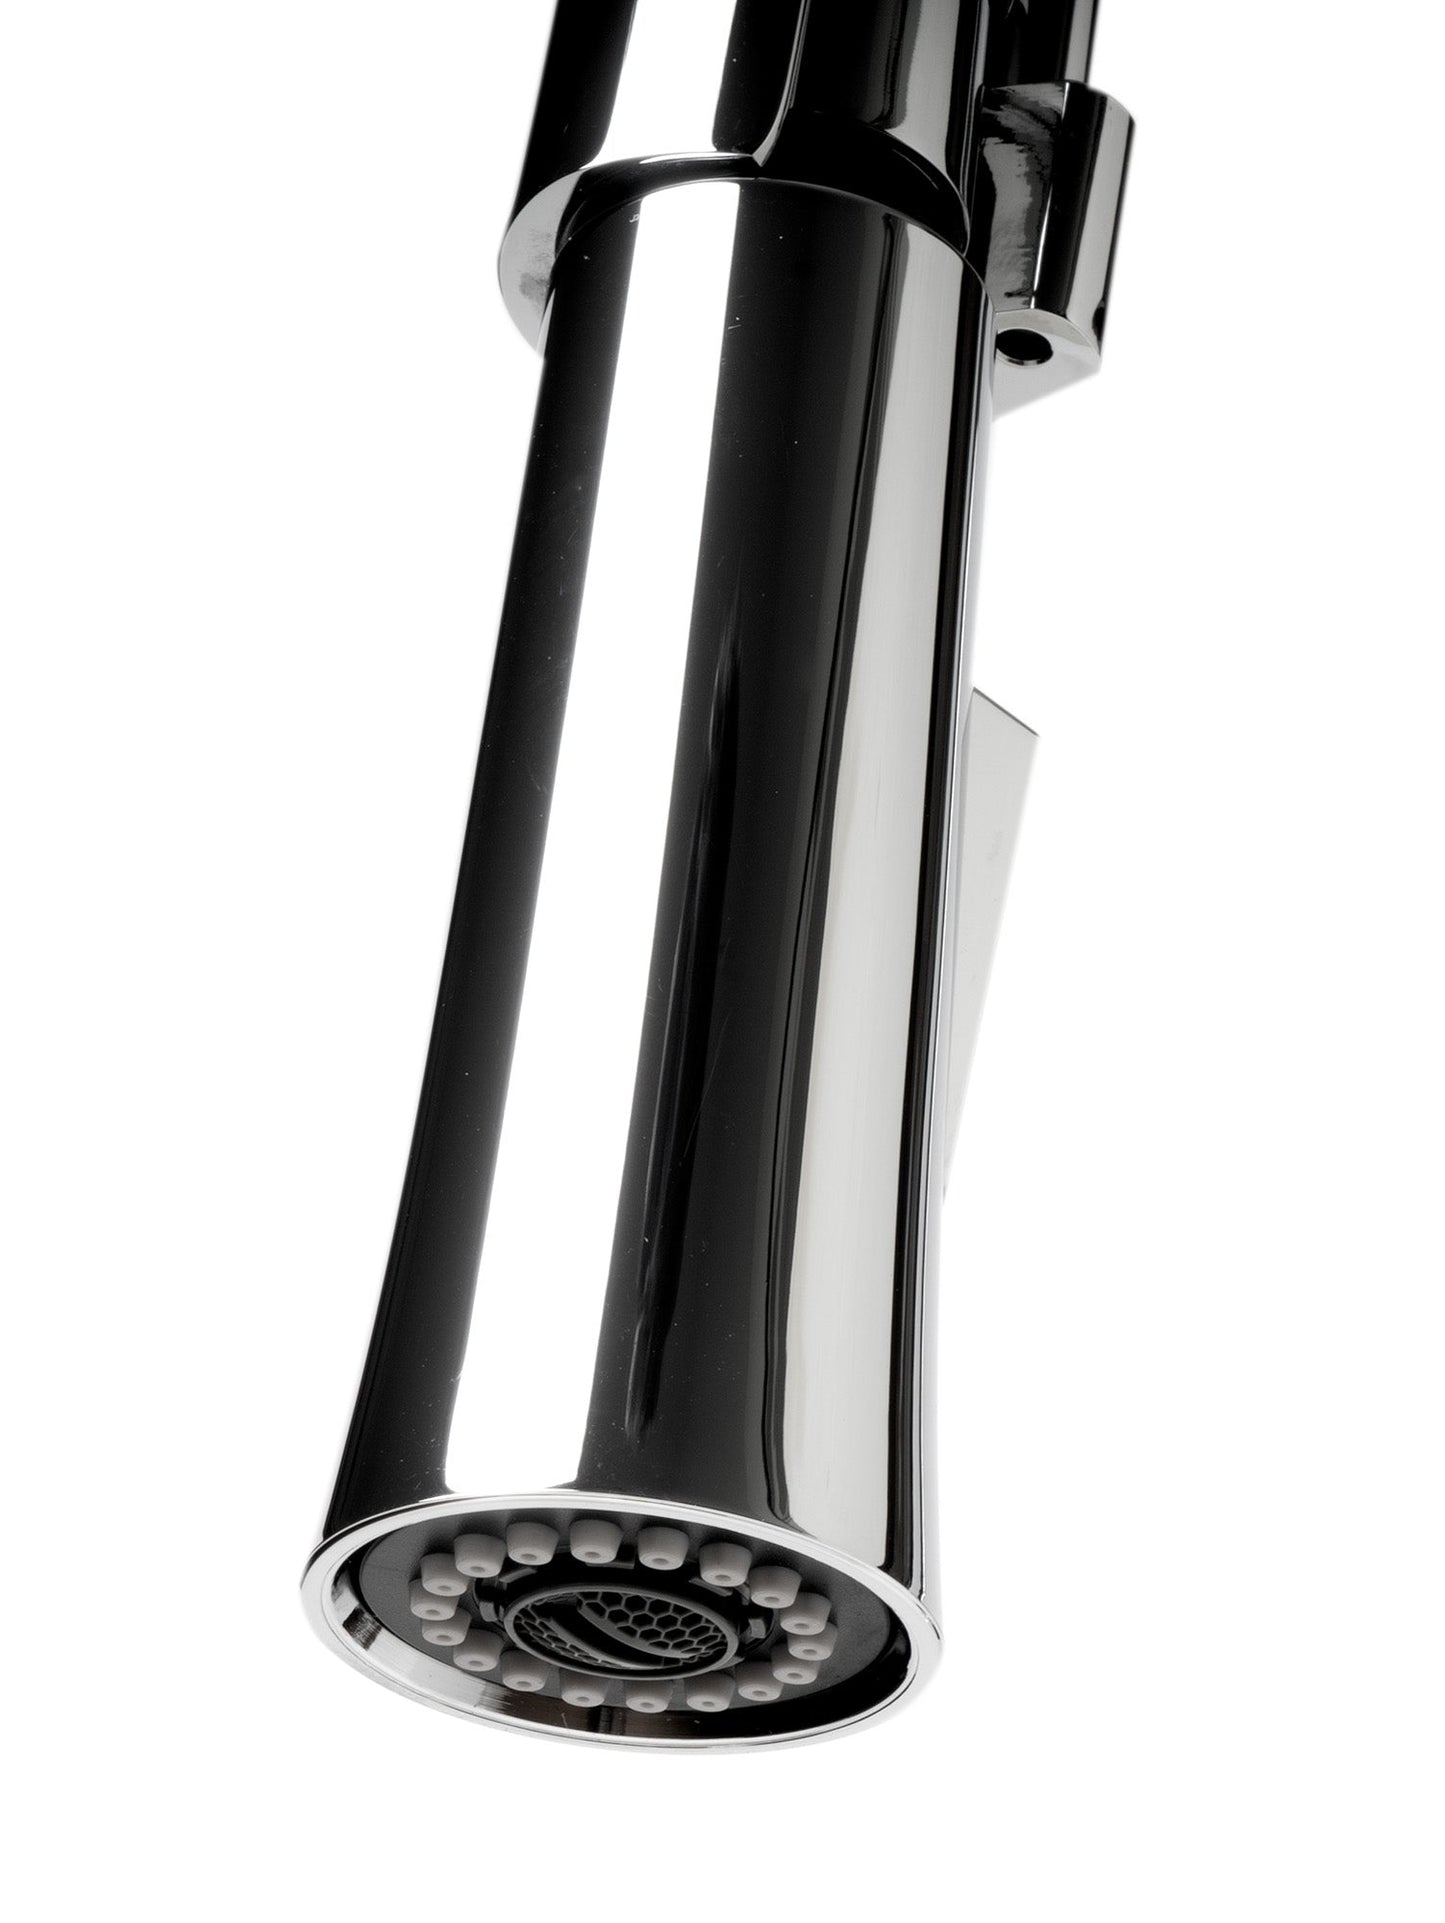 ALFI brand ABKF3023 Square Kitchen Faucet with Black Rubber Stem